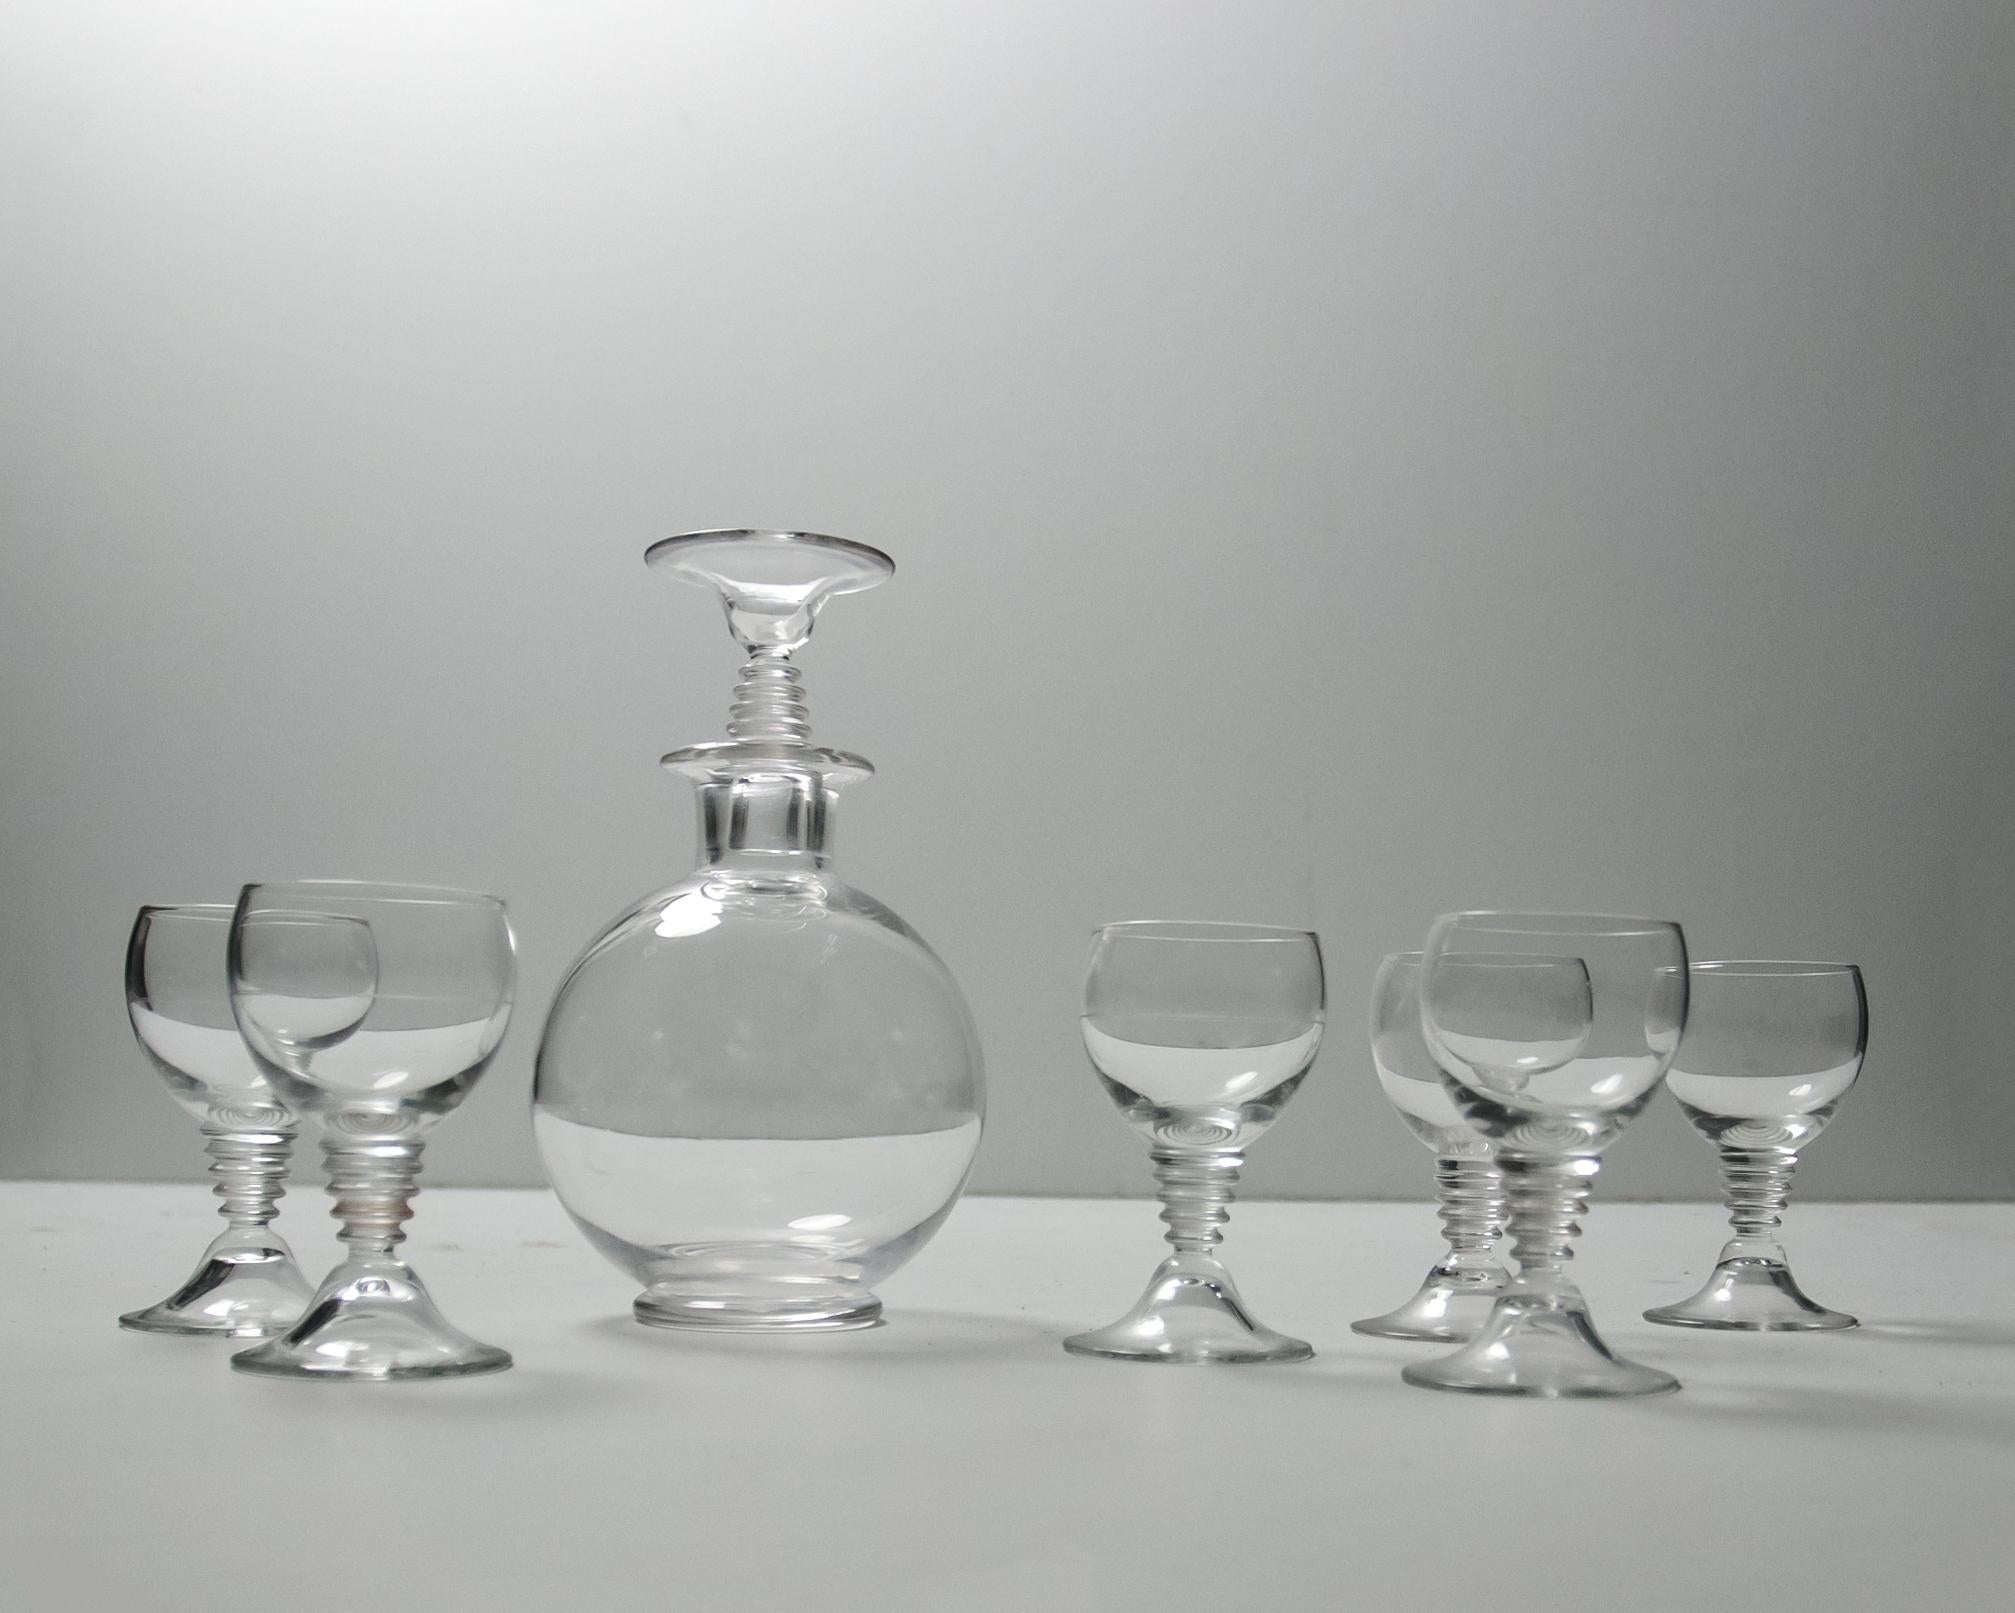 Beautiful Decanter (22cm high) and 6 little glasses designed by Willem Jacob Roozendaal in 1932 for Kristalunie Maastricht.
The set contains 7 pieces and all in a good condition with little traces of use.

Keywords: Christmas gift, Present,